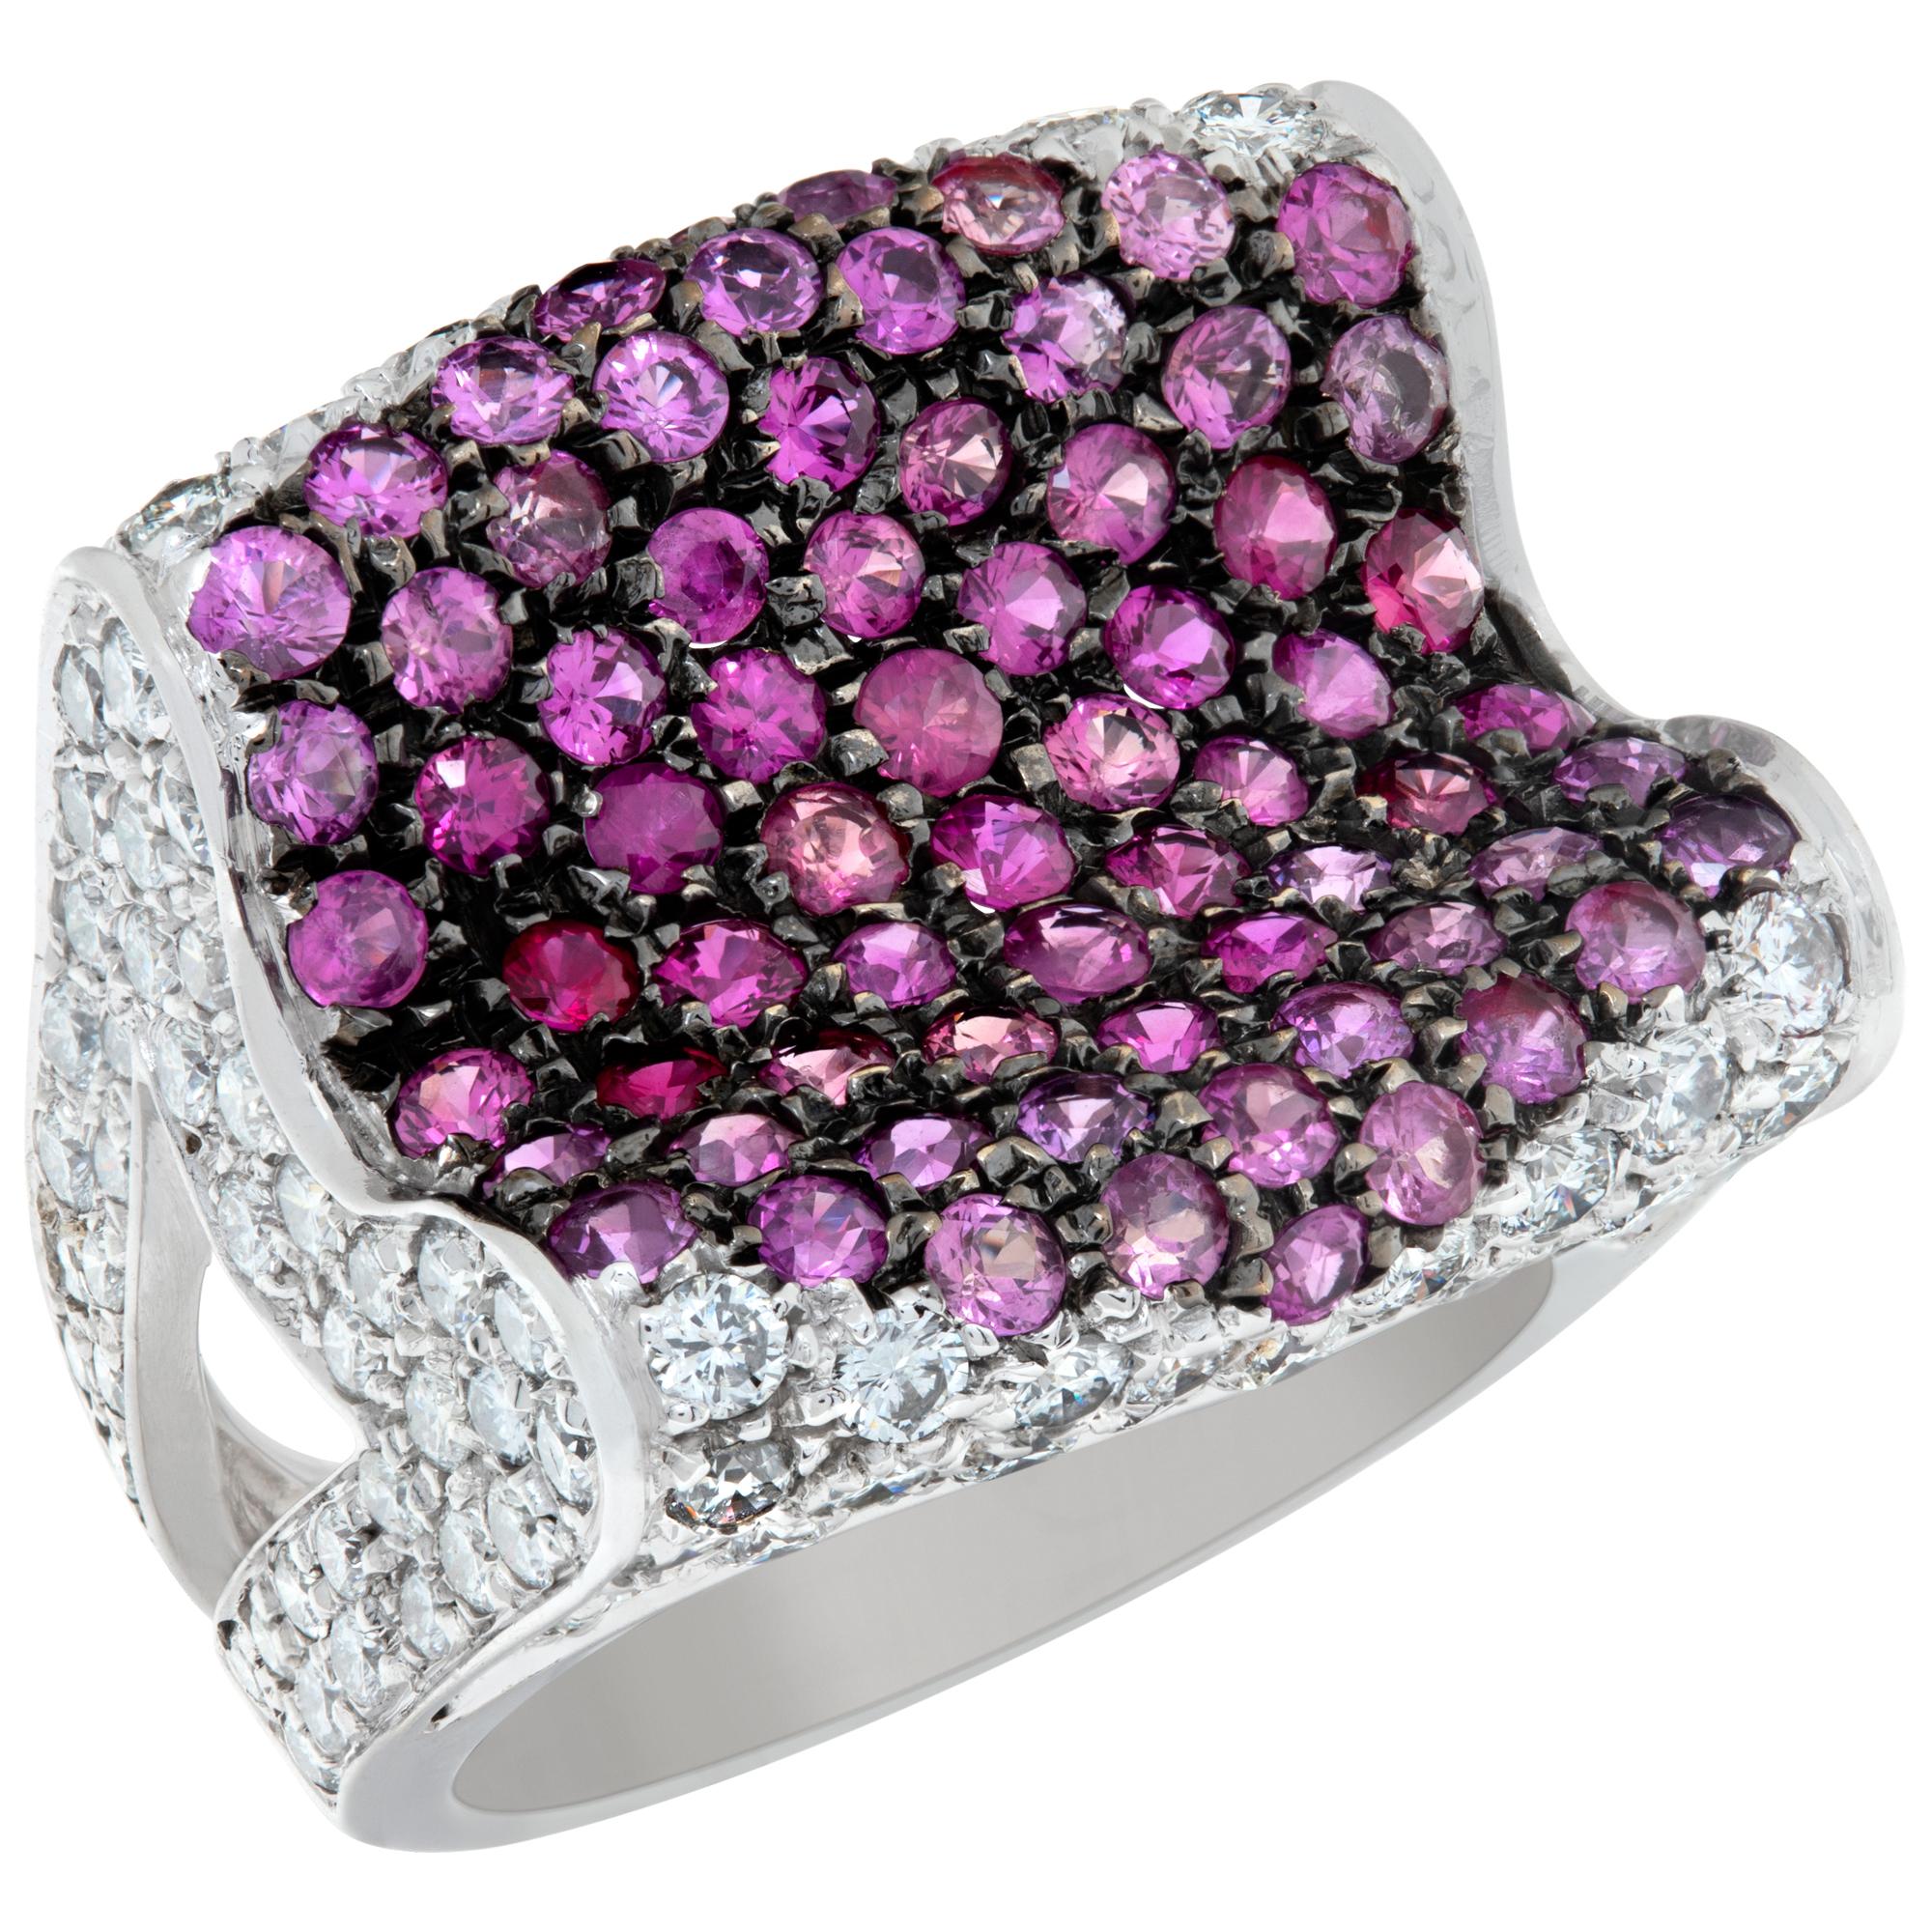 White gold pave diamond and pink sapphire ring In Excellent Condition For Sale In Surfside, FL